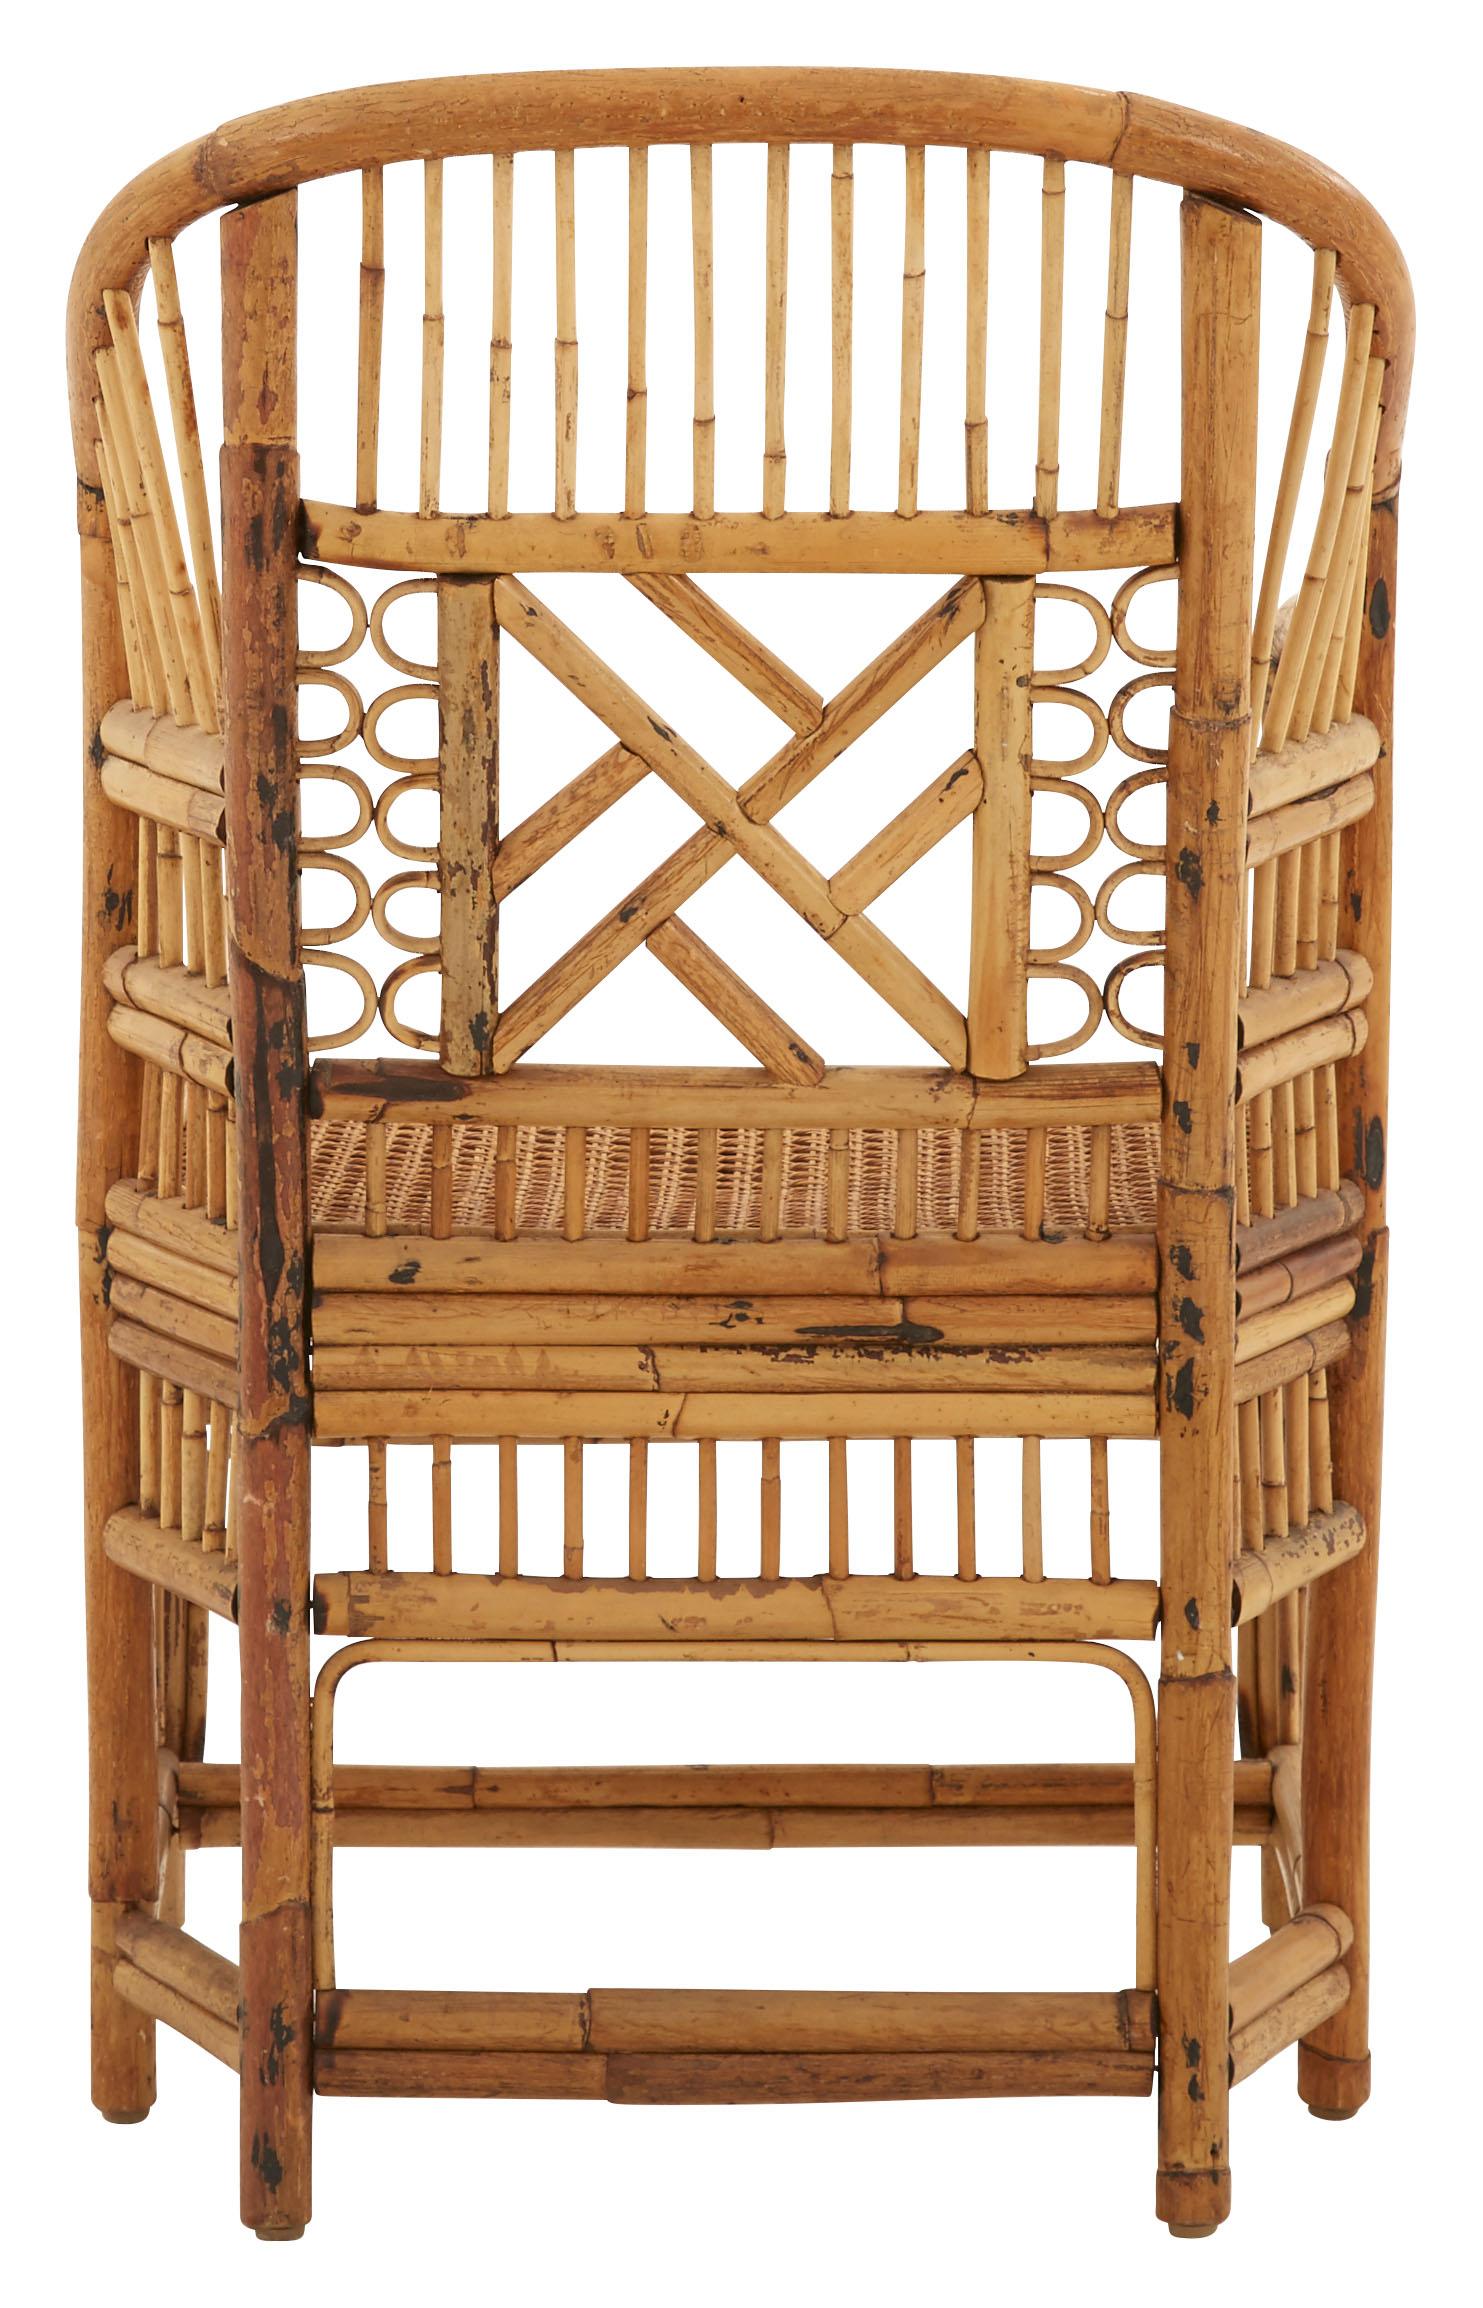 American Midcentury Bamboo and Rattan Armchair with Cane Seat